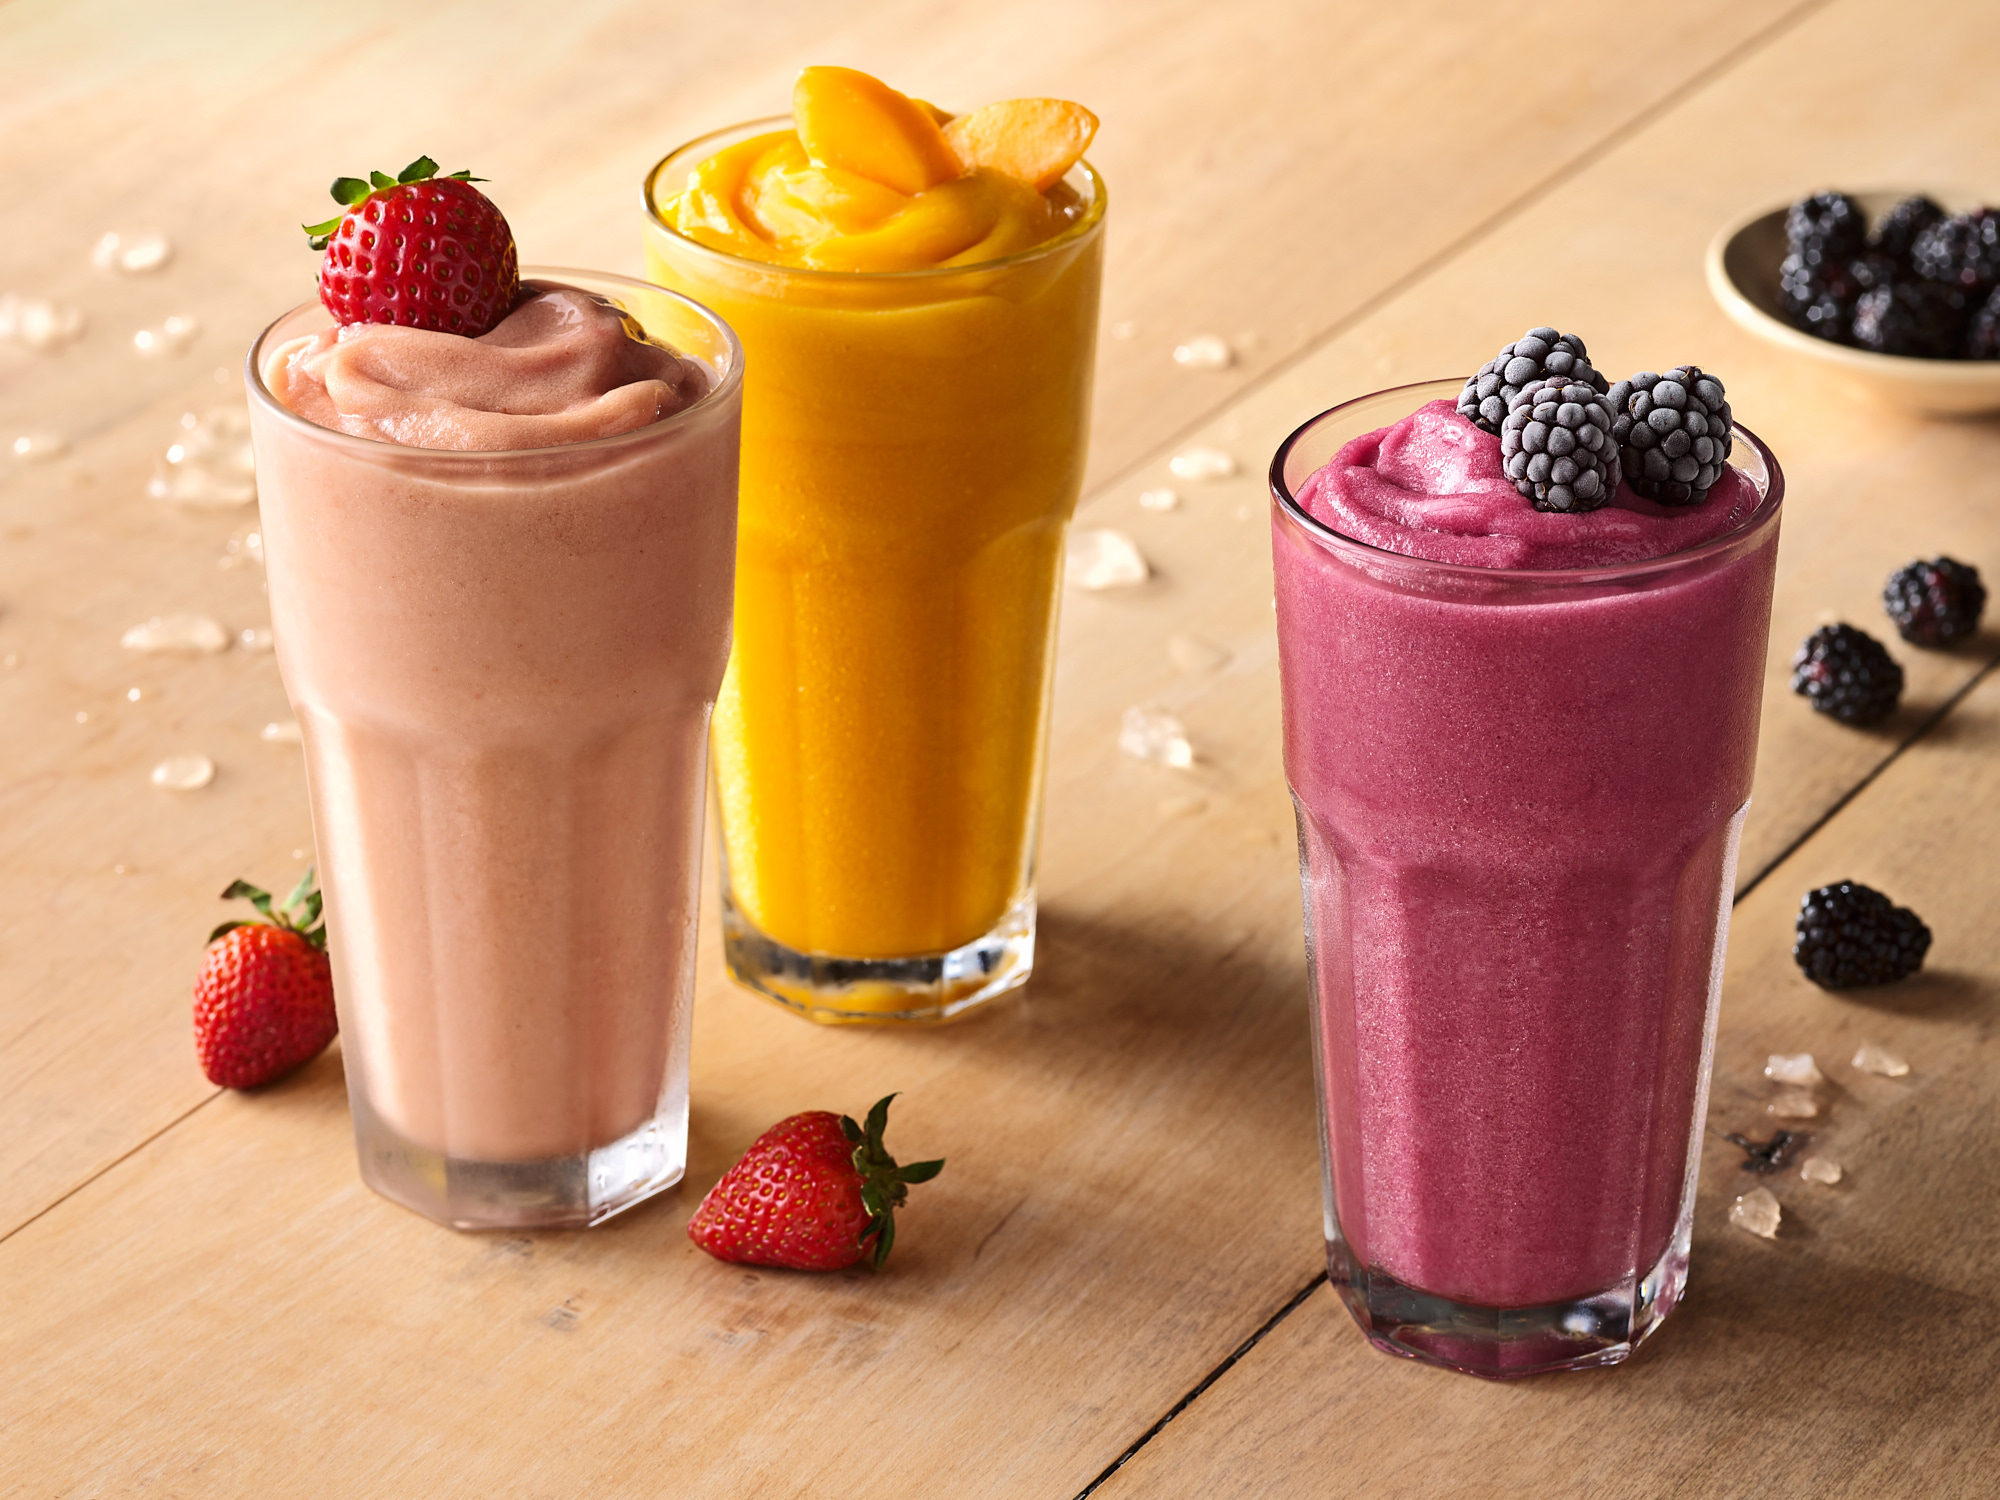 Los Angeles commercial food photographer Vinnie Finn shoots new remote work for Applebee's. Previous fruit smoothie trio work featured. | SternRep